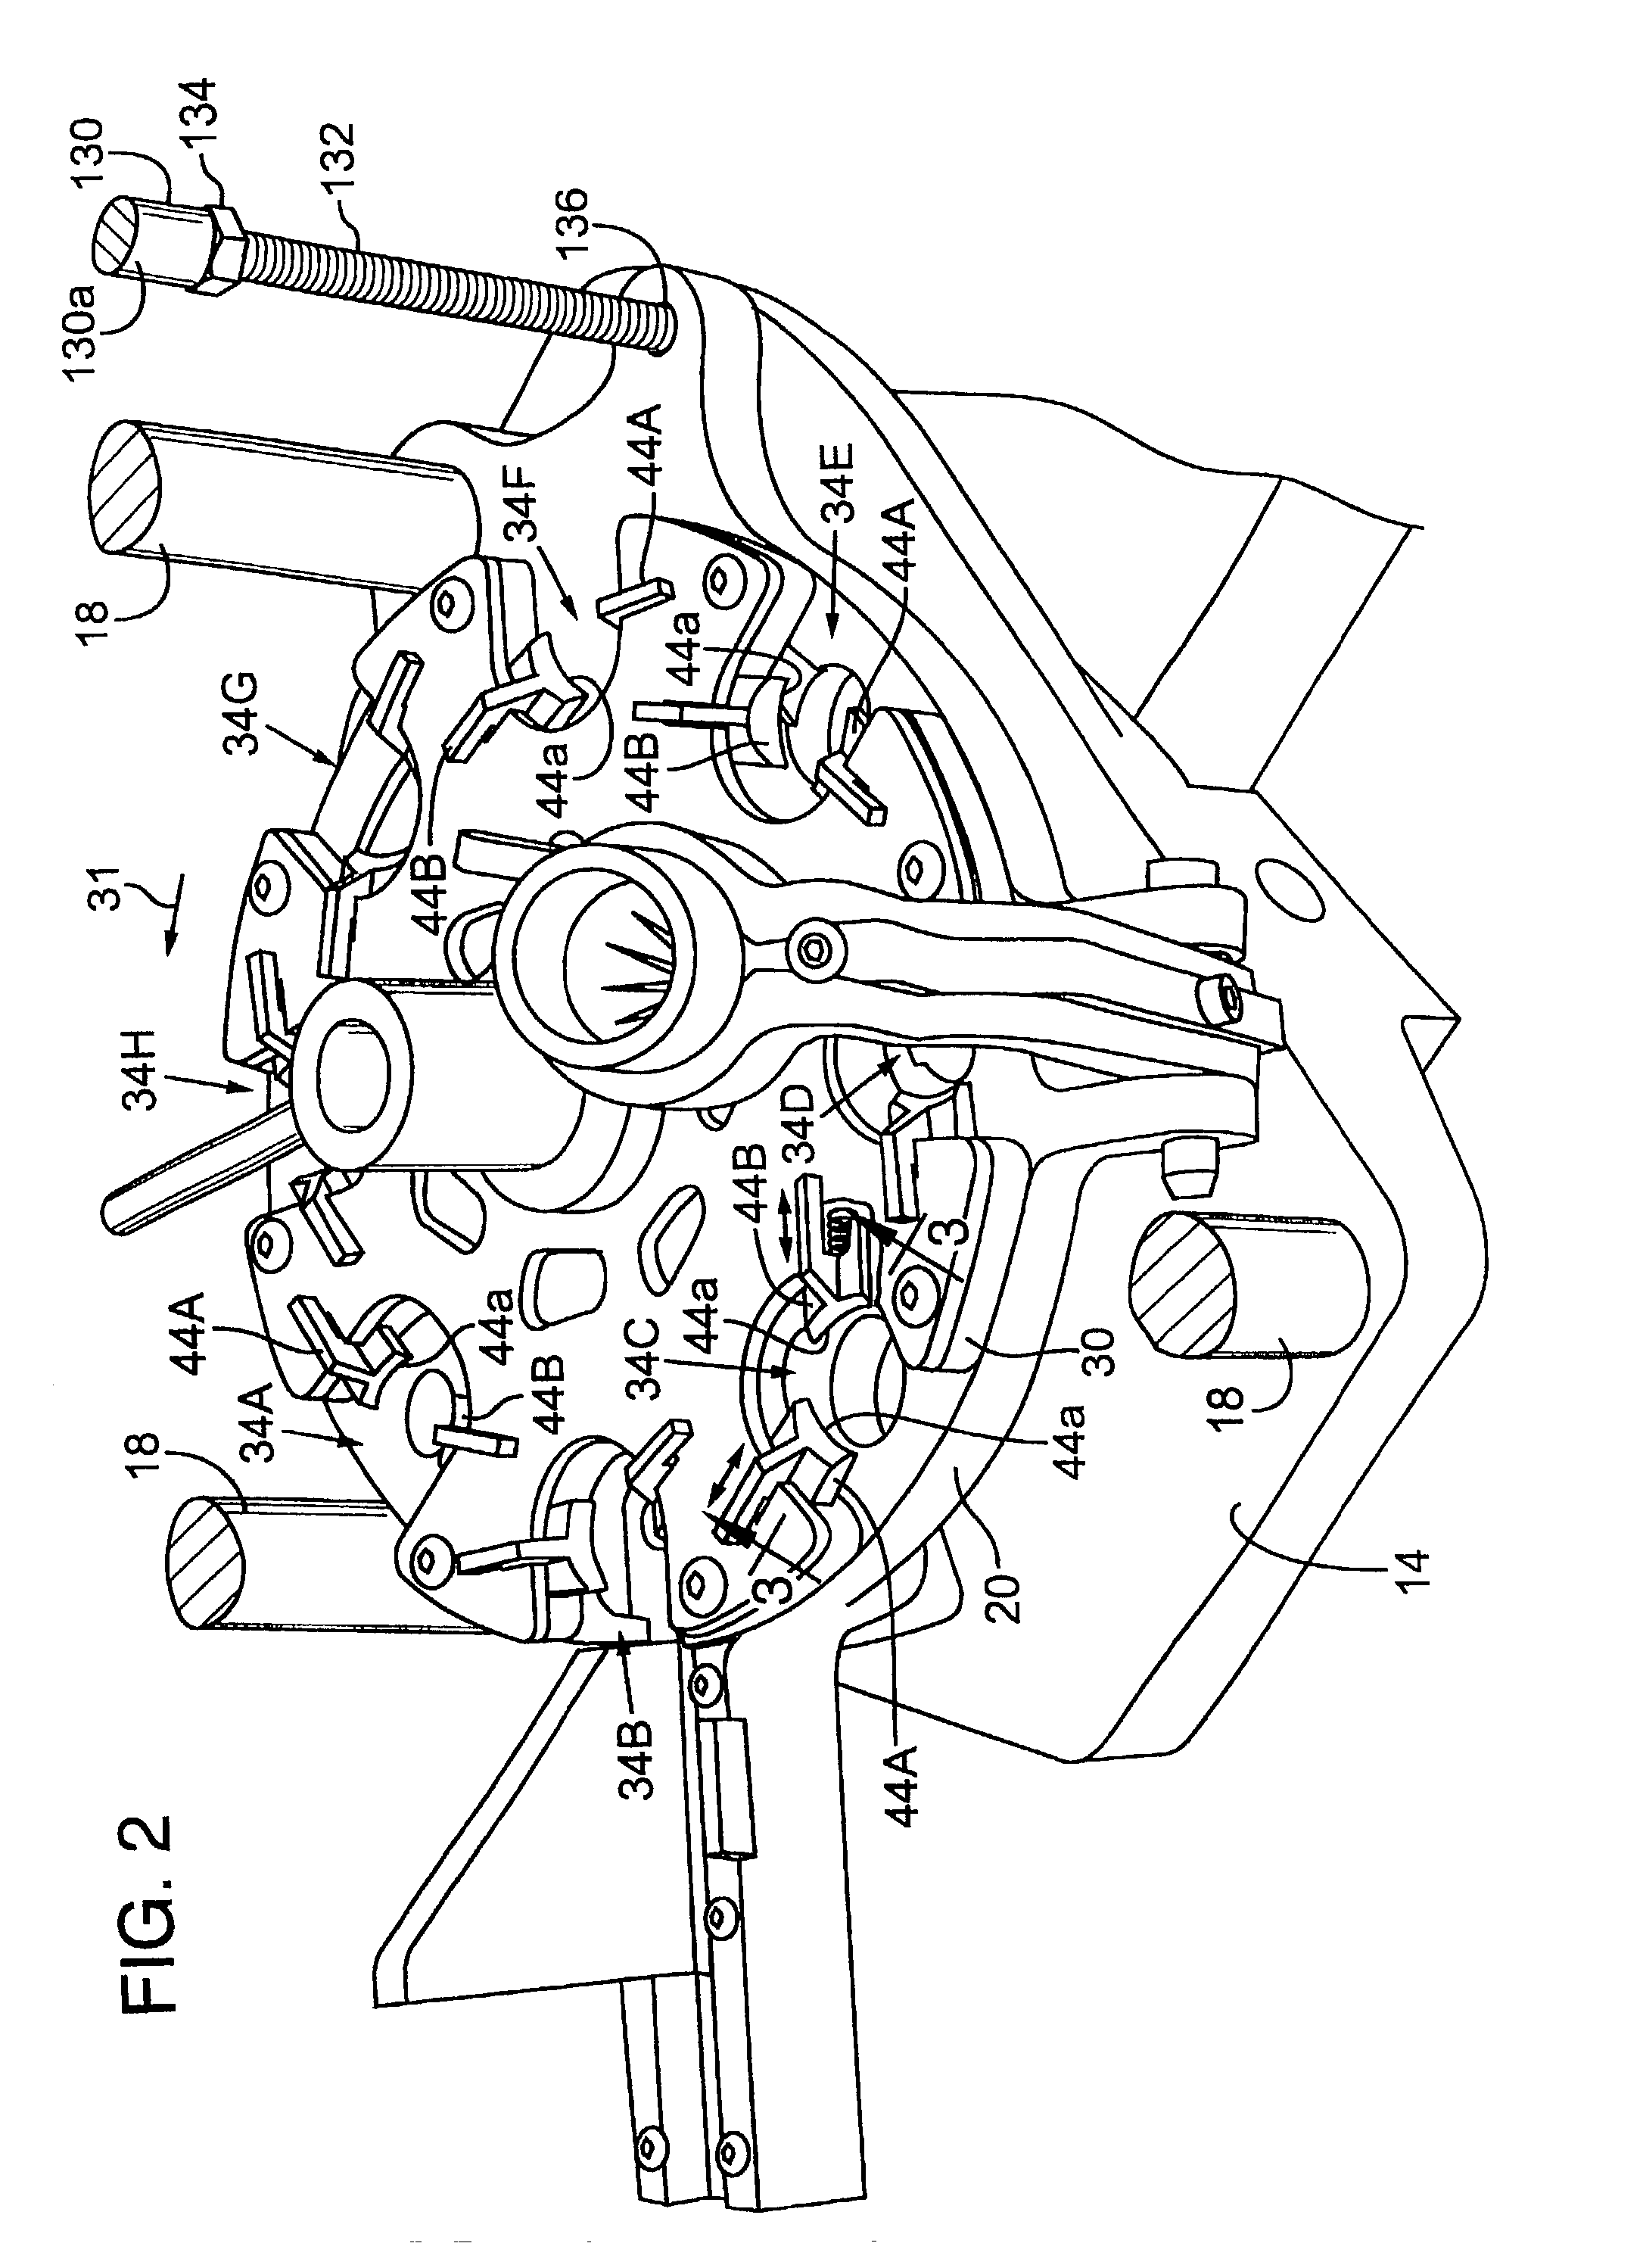 Ammunition reloading apparatus with feed mechanism